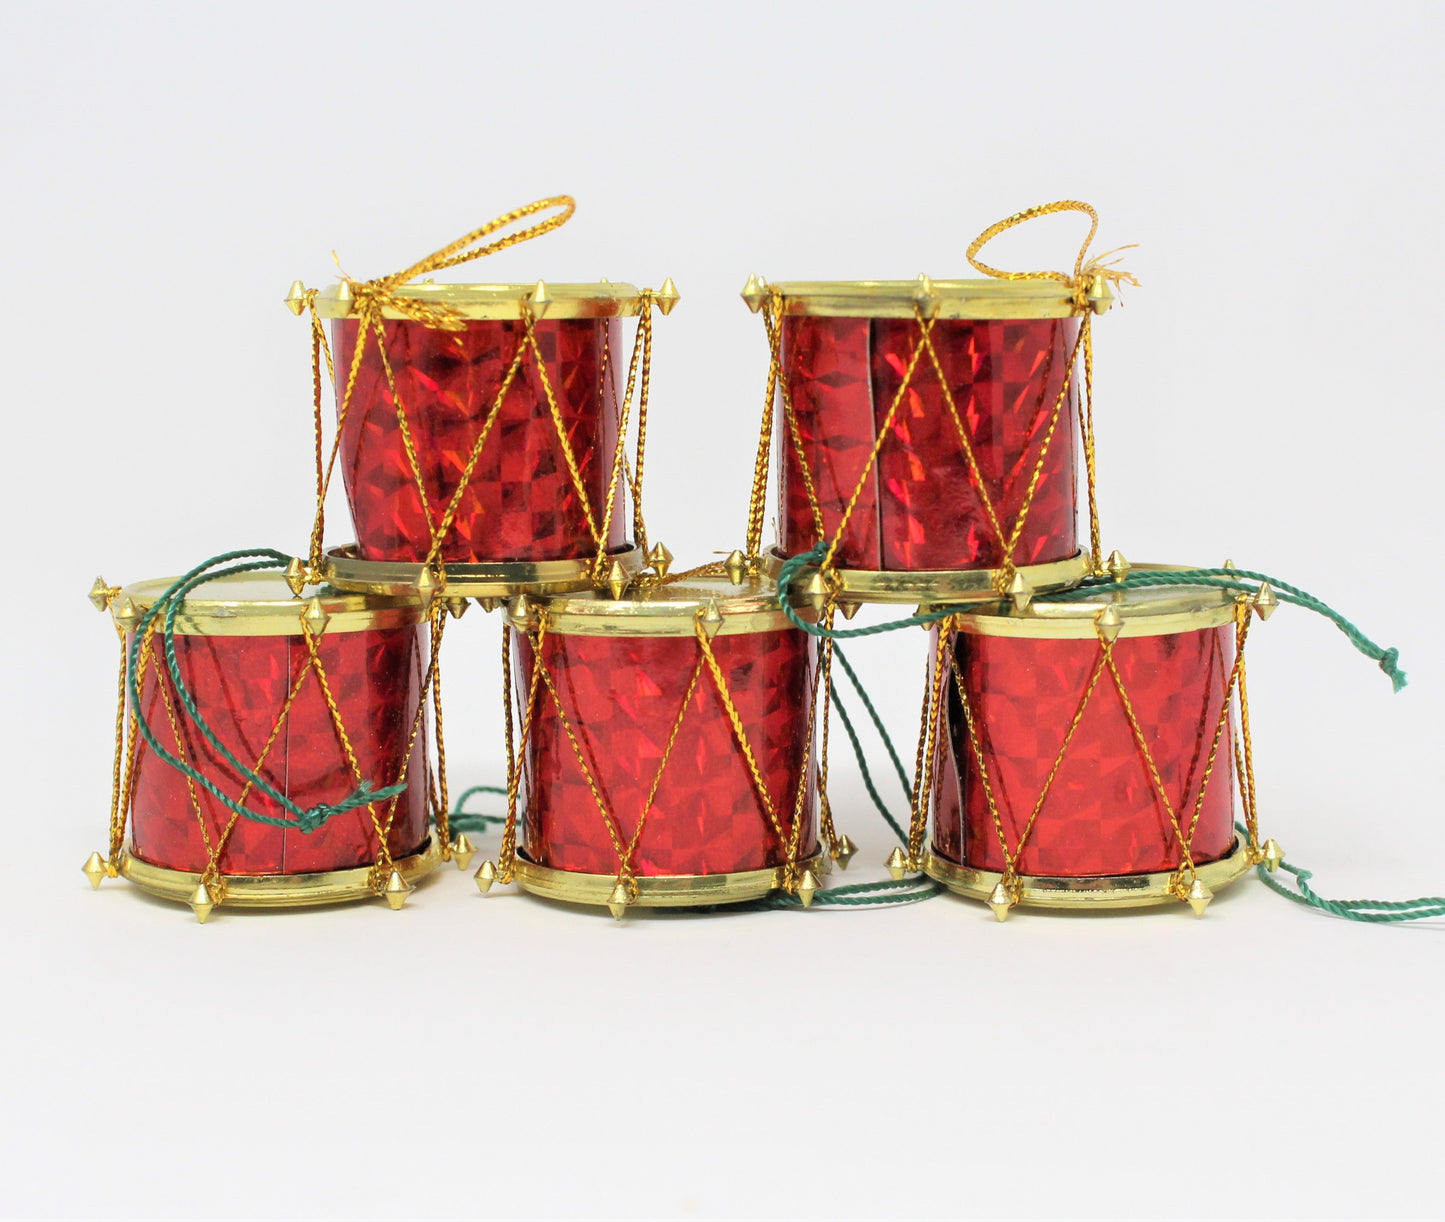 Ornaments, Mini Christmas Drums, Red & Gold, Vintage, Set of 5